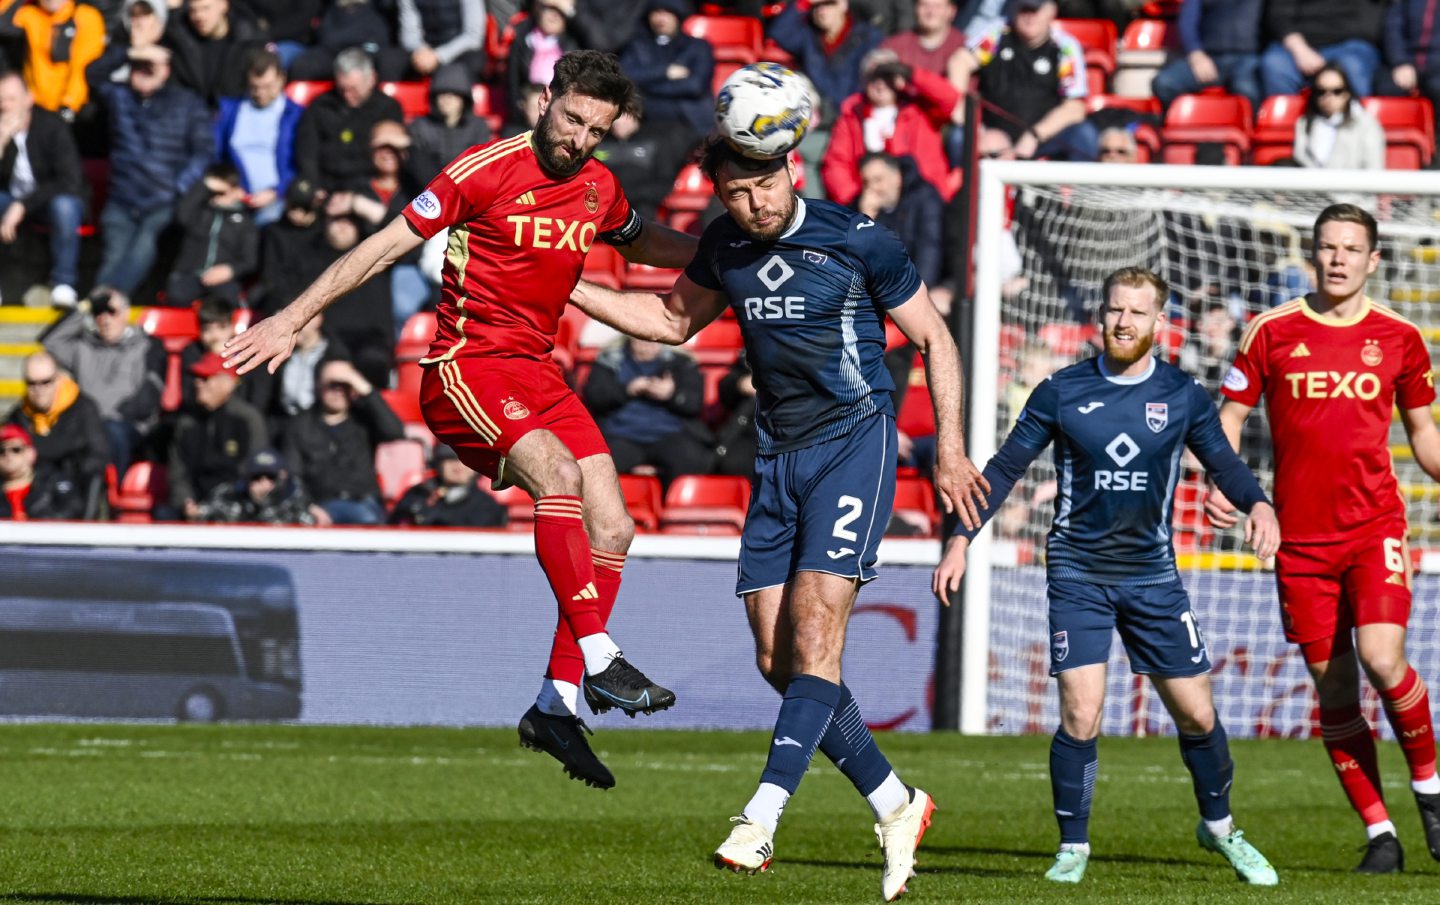 Aberdeen's Graeme Shinnie and Ross County's Connor Randall in action at Pittodrie.